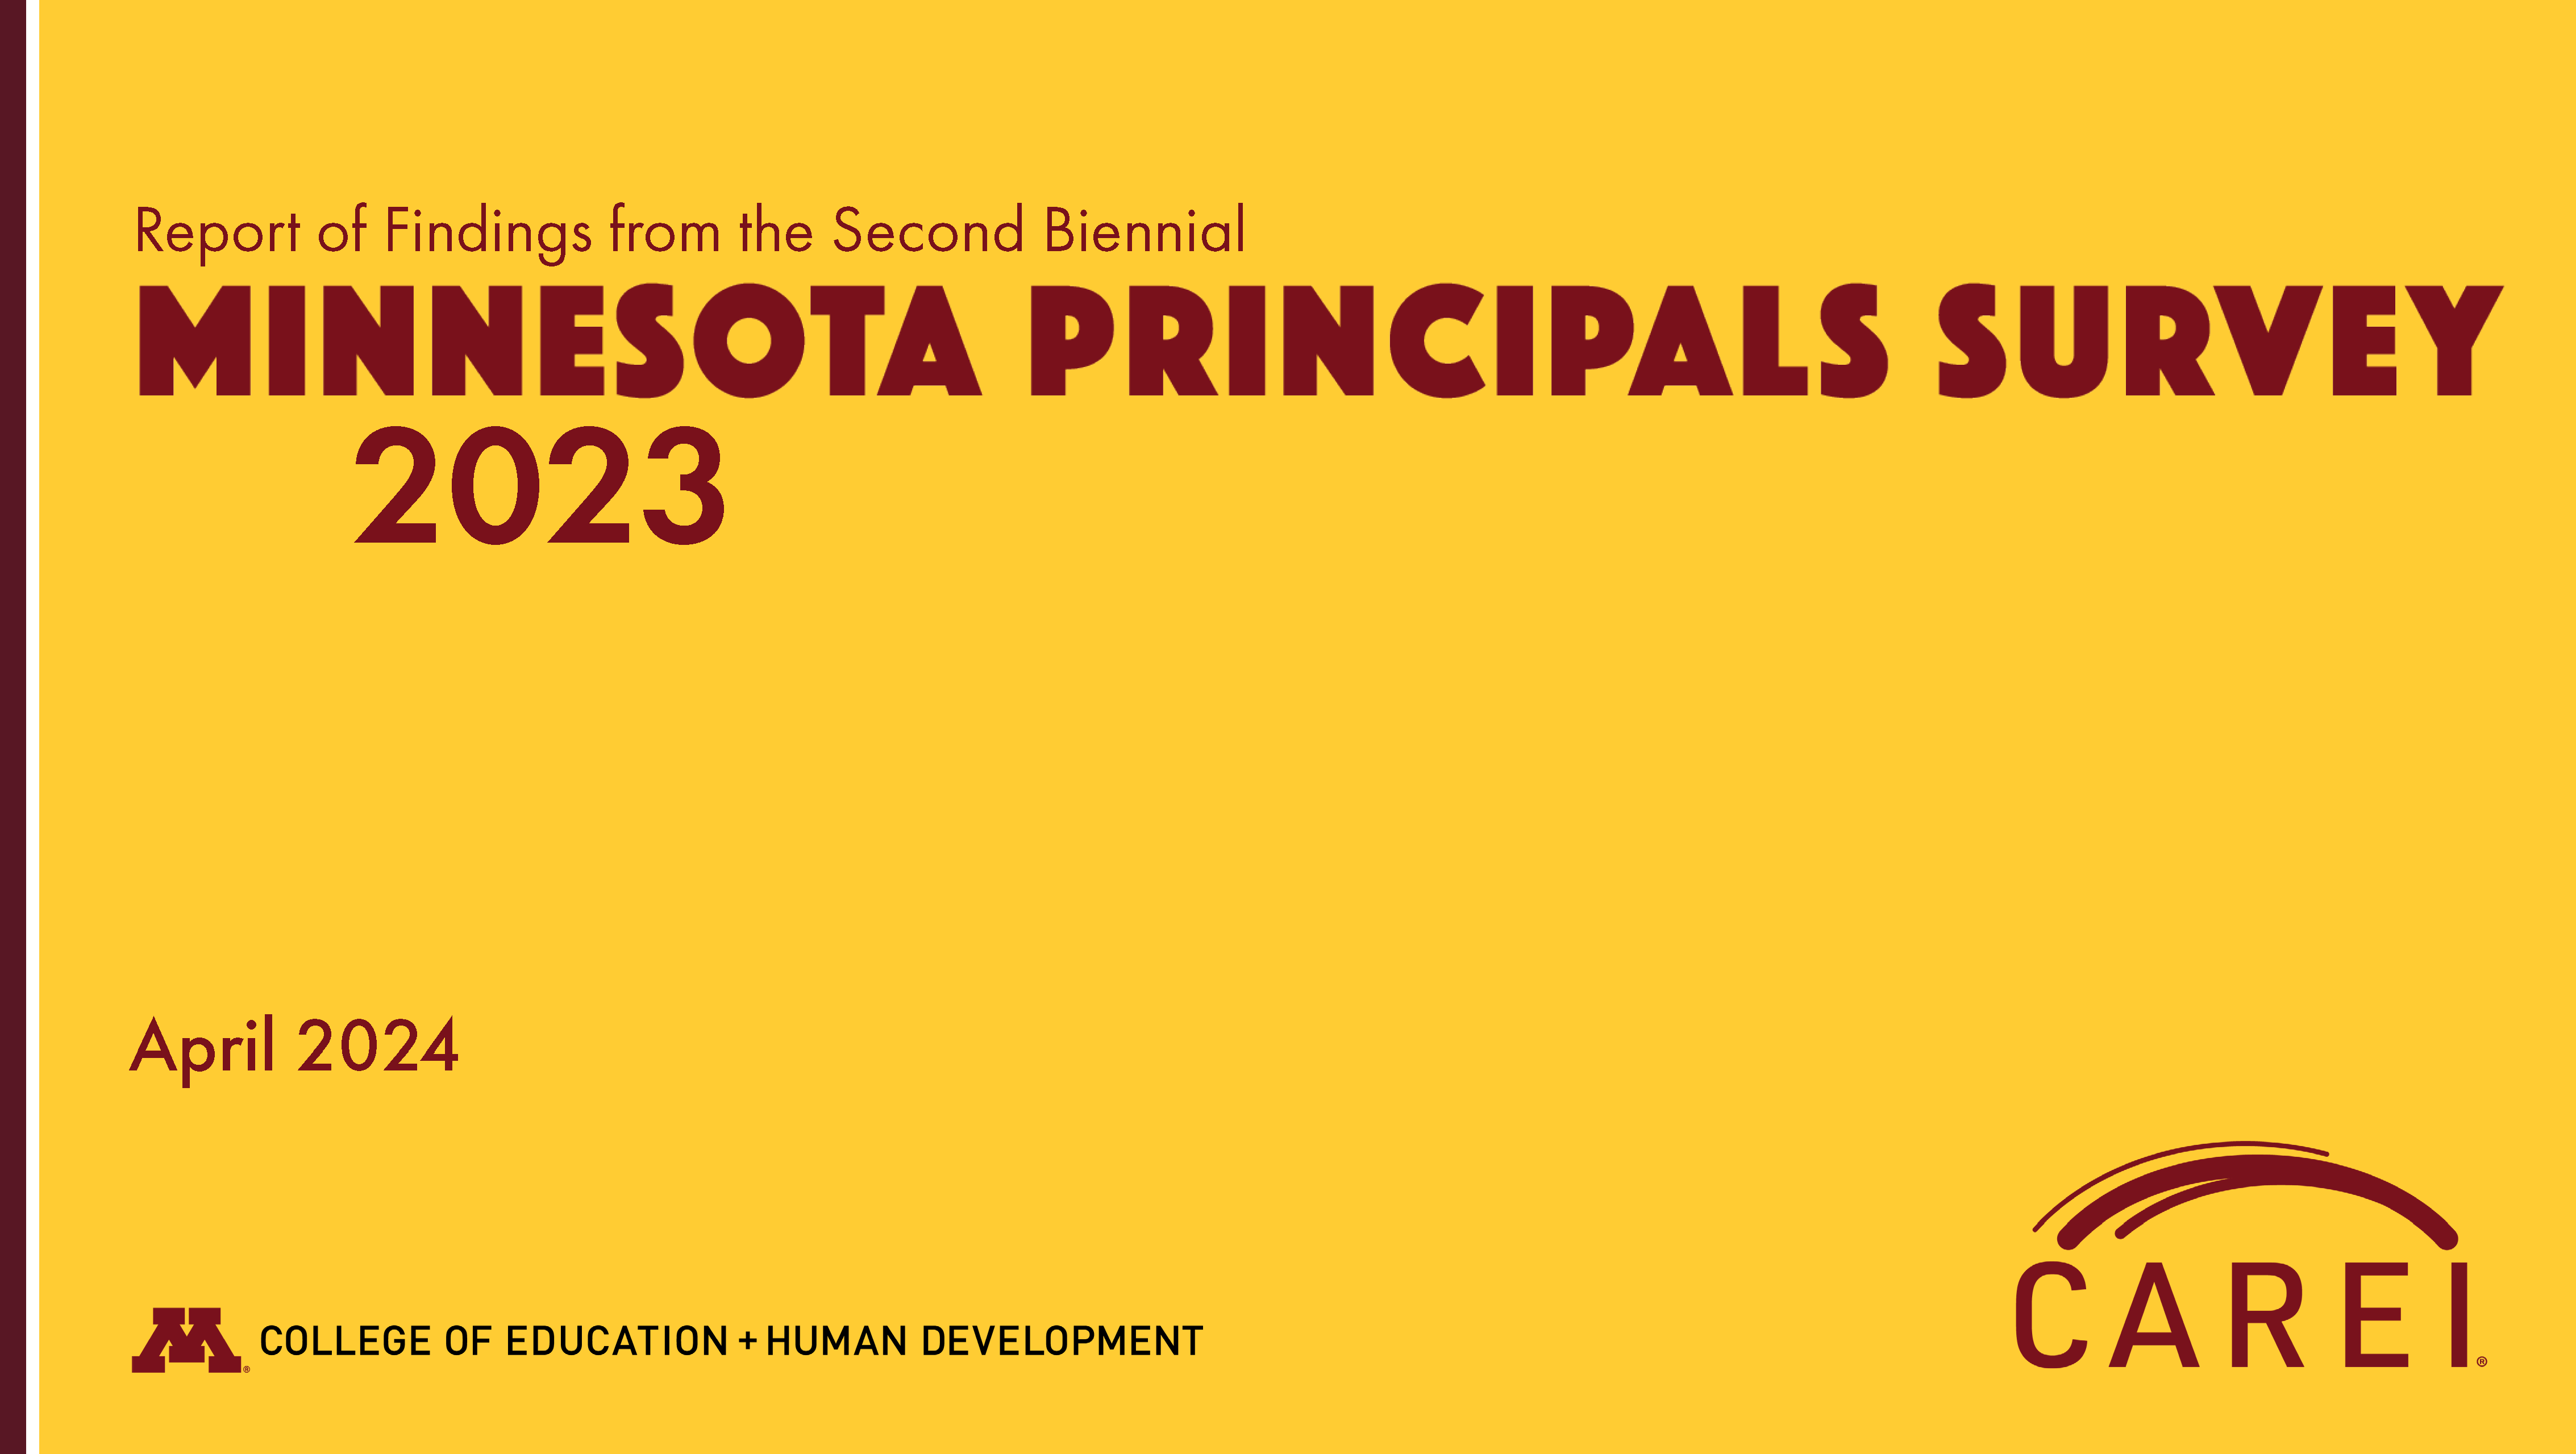 Image of cover page of 2023 Principals Survey main report.